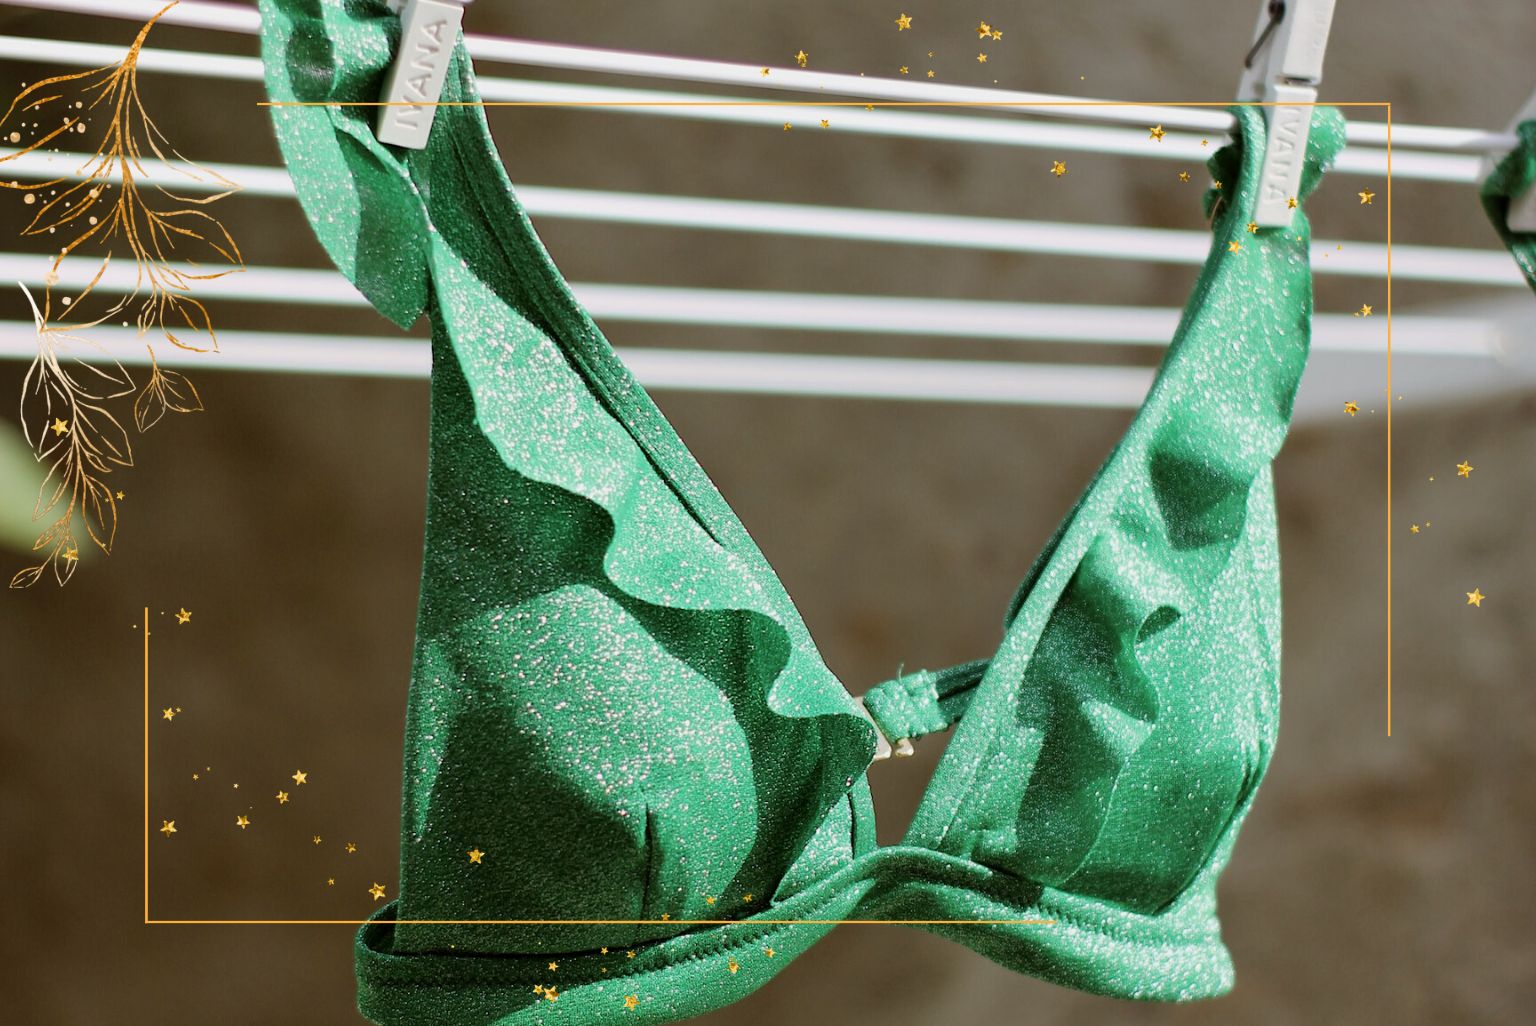 What is the best way to wash bras